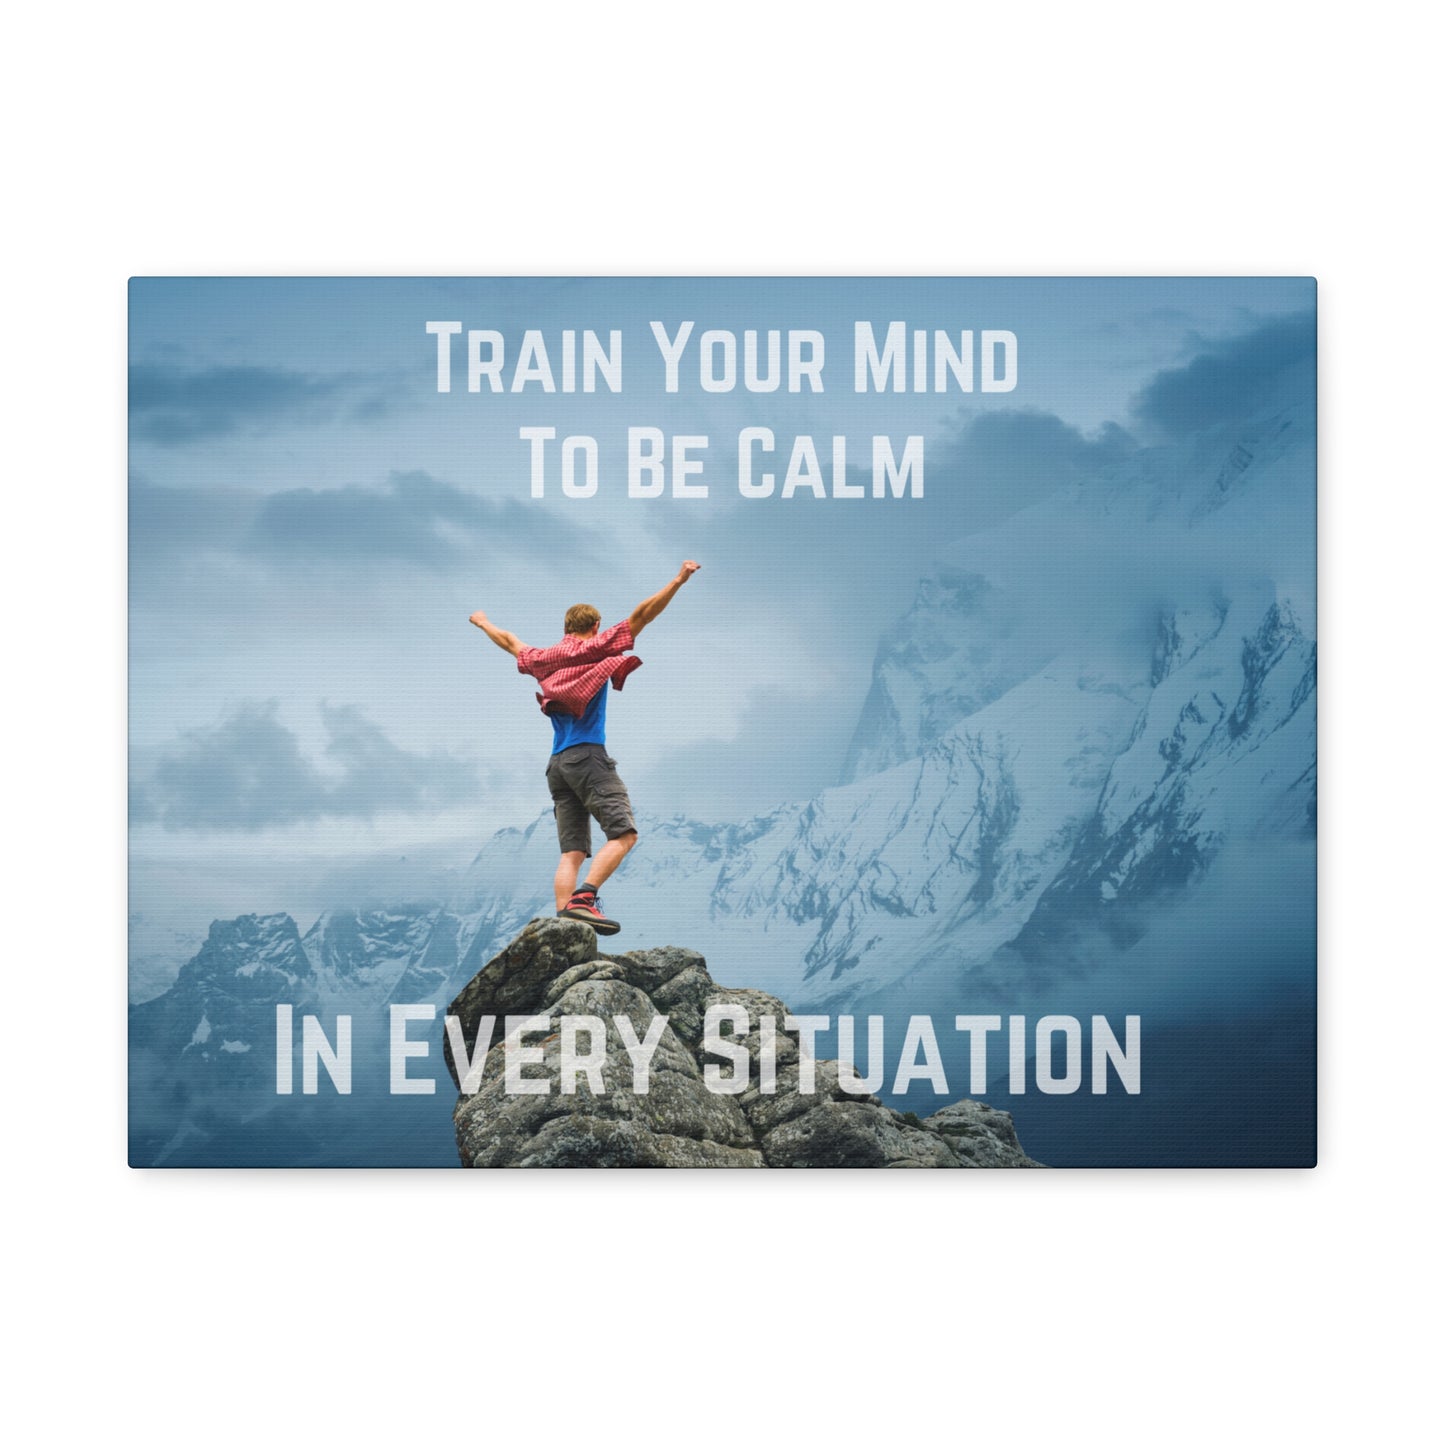 "Train Your Mind To Be Calm" Wall Art - Weave Got Gifts - Unique Gifts You Won’t Find Anywhere Else!